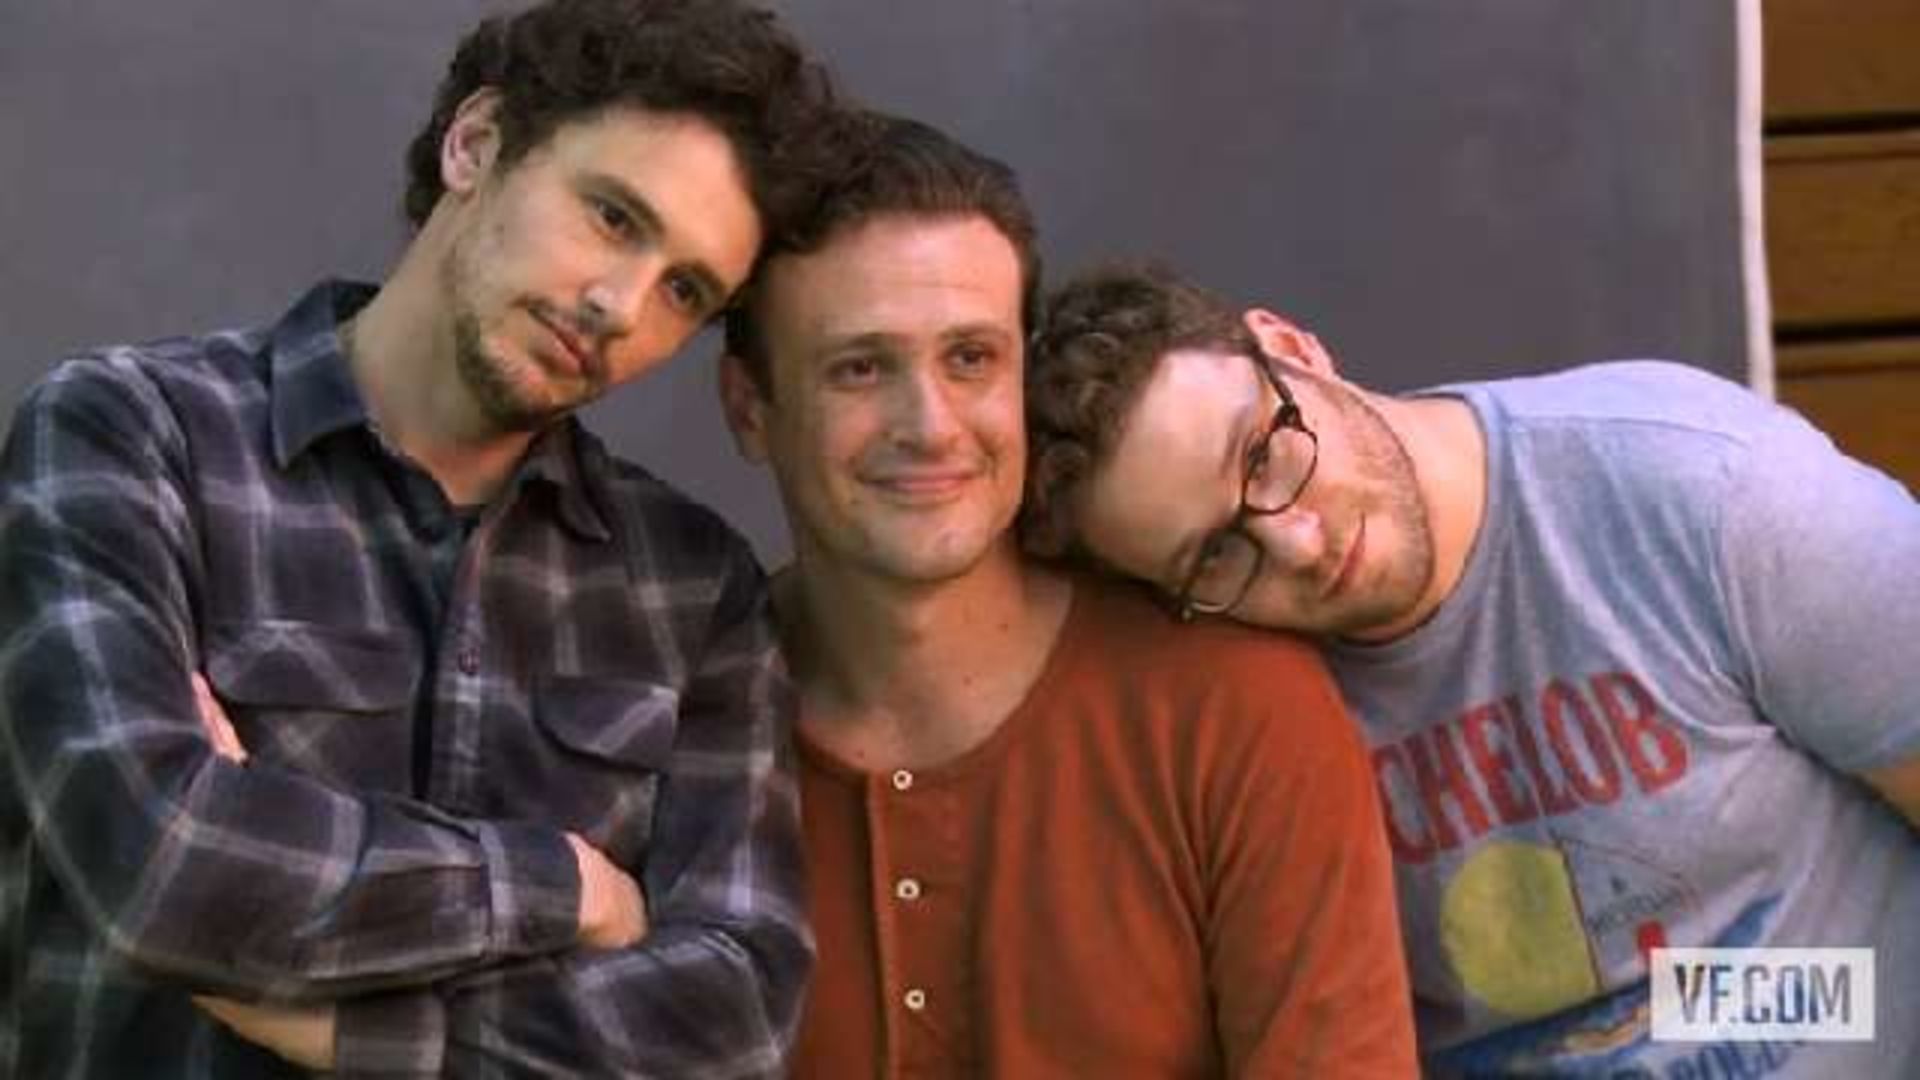 Watch The Cast Of Freaks And Geeks On How They Got Their Roles The